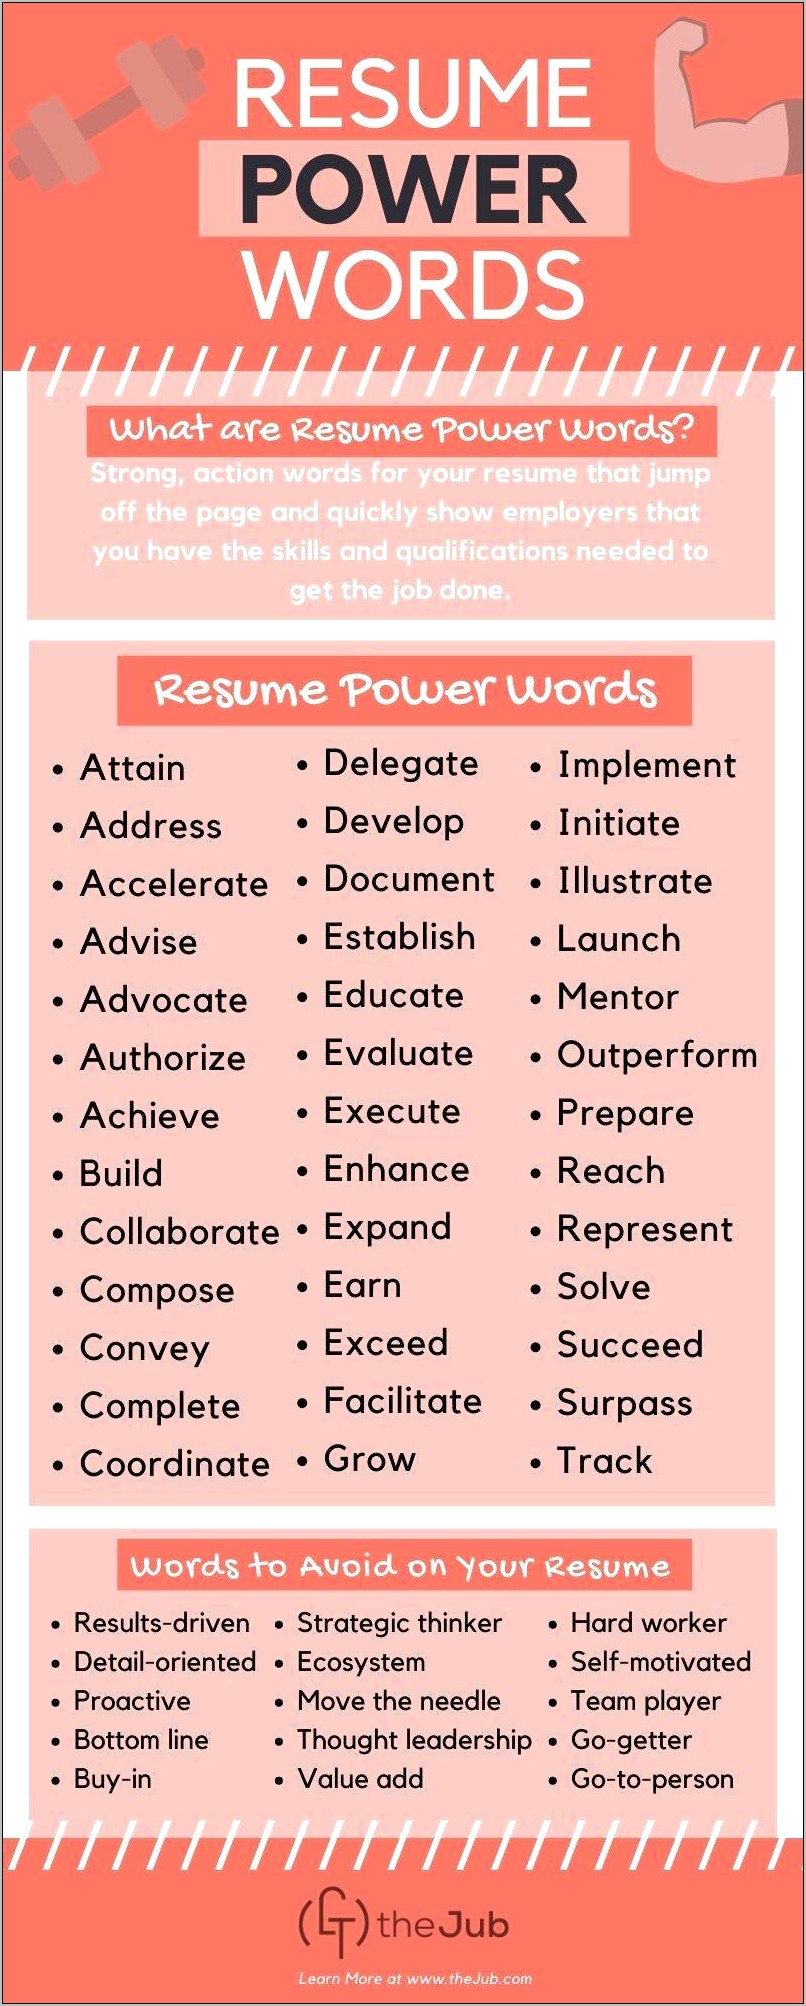 Good Skills To Add For Resume